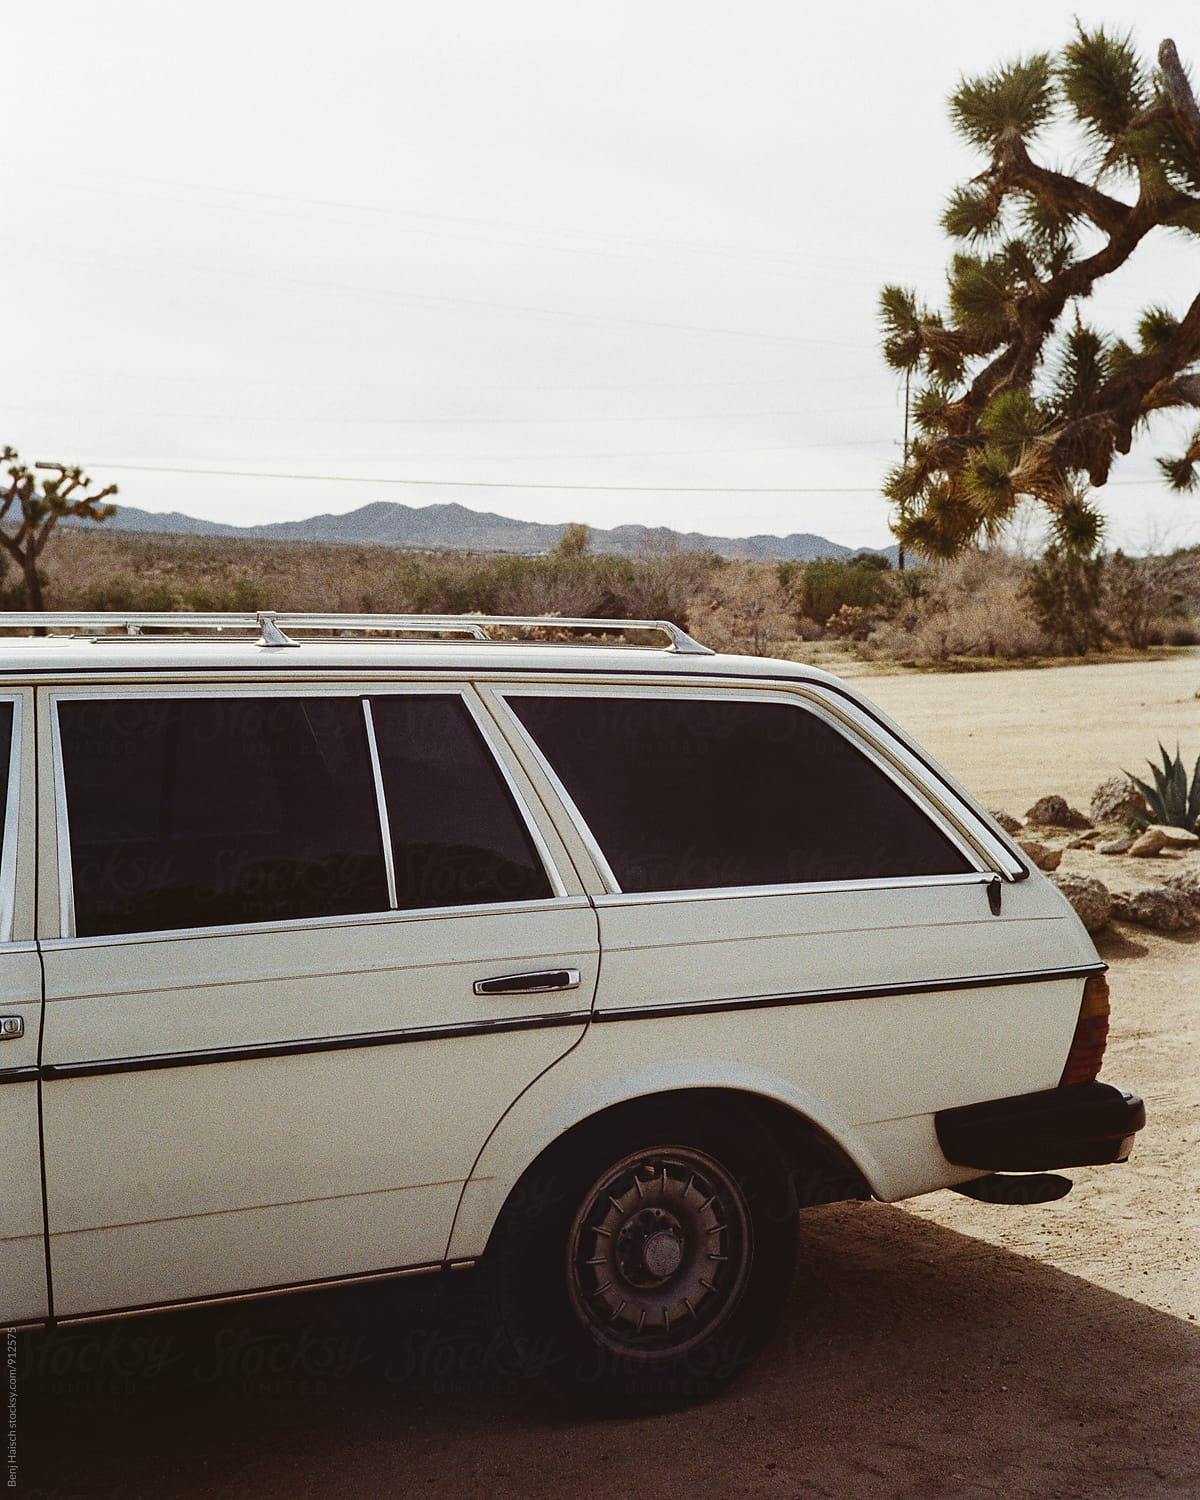 An Old White Car in Joshua Tree.